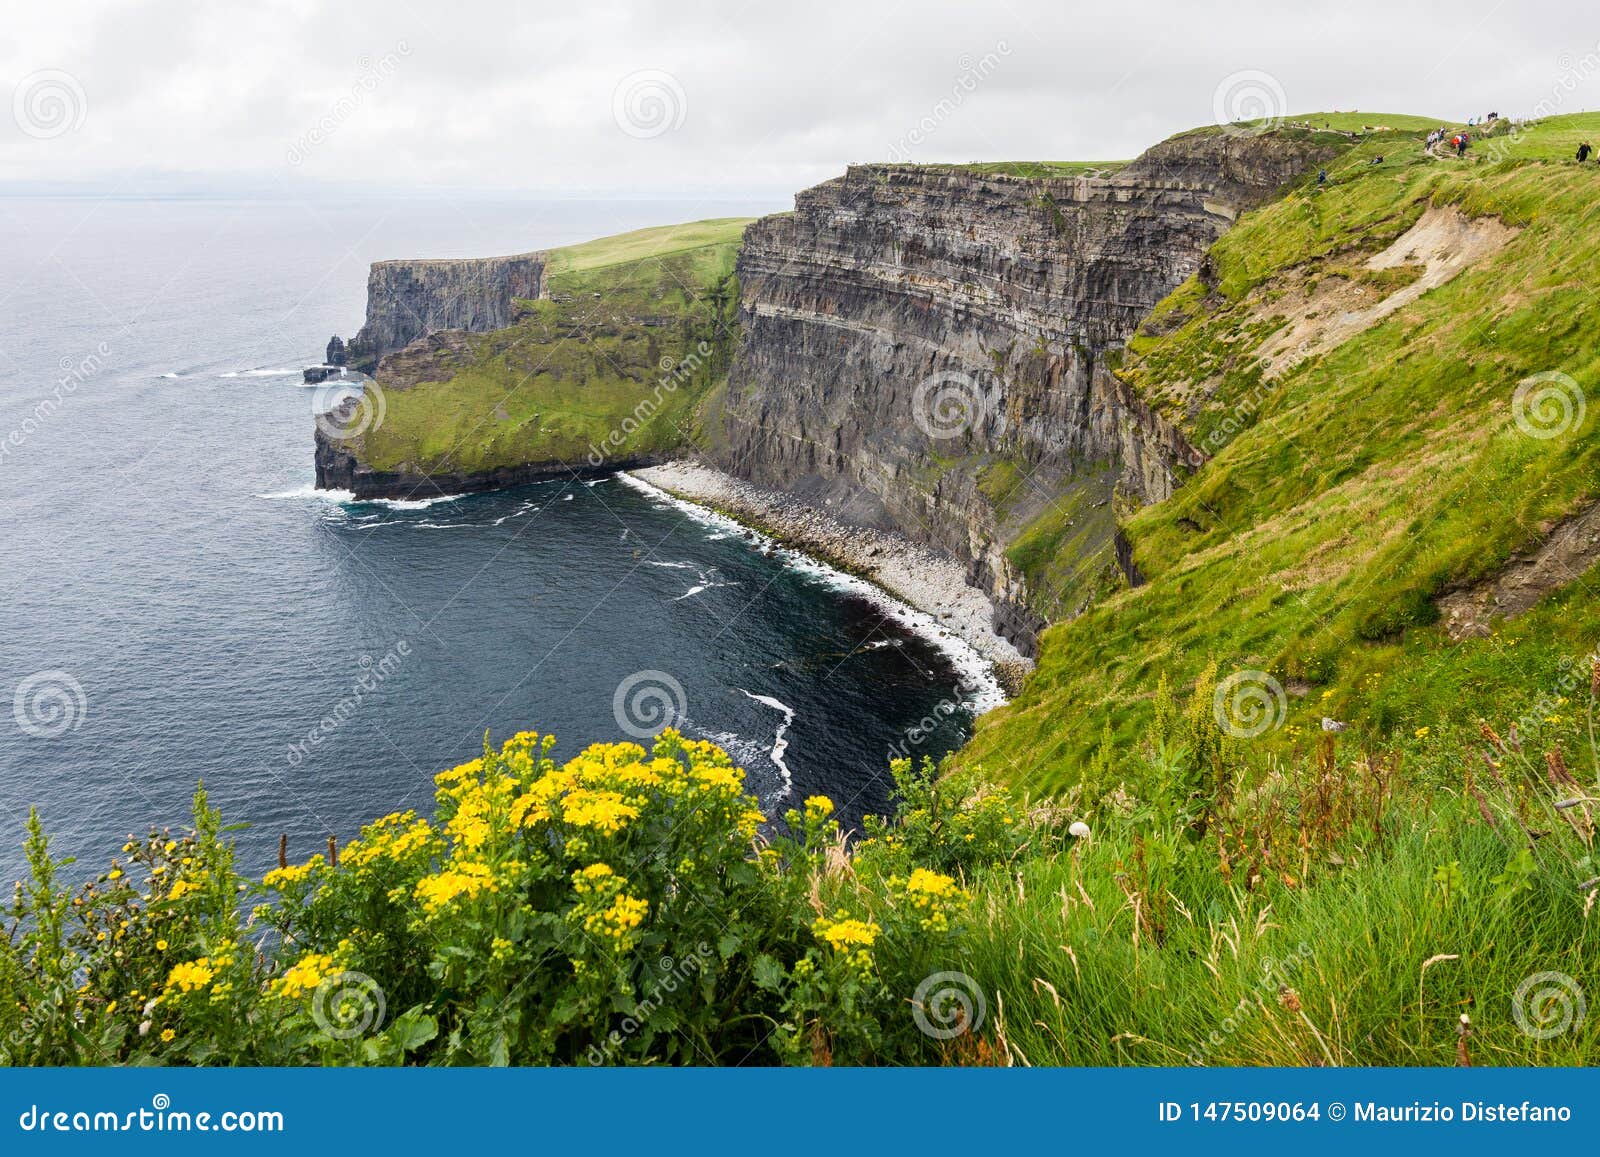 landascapes of ireland.  cliffs of moher